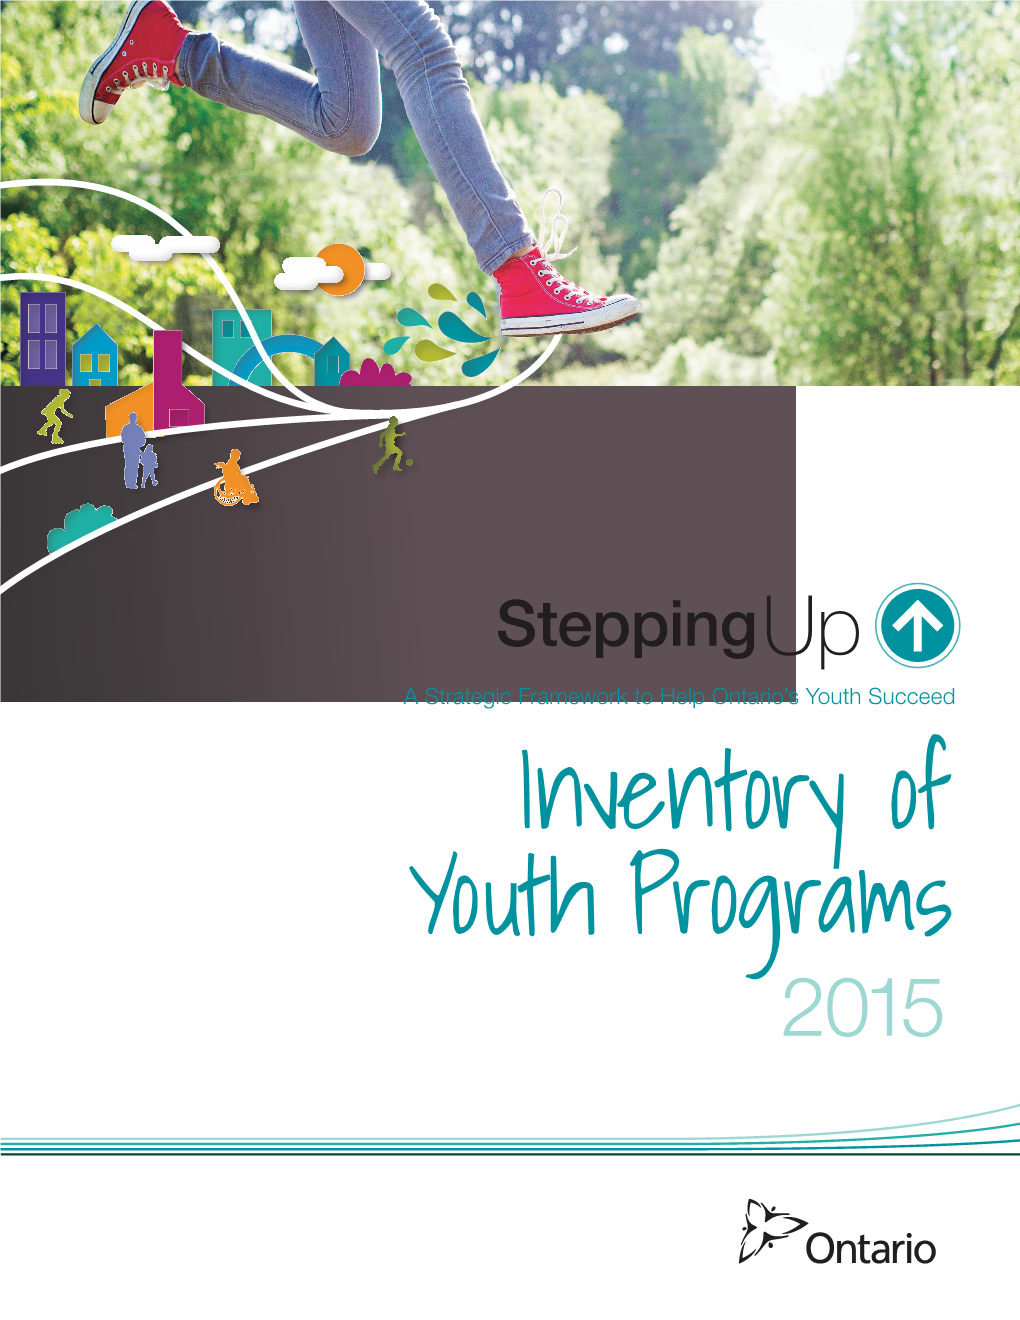 2015 Stepping up Inventory of Youth Programs